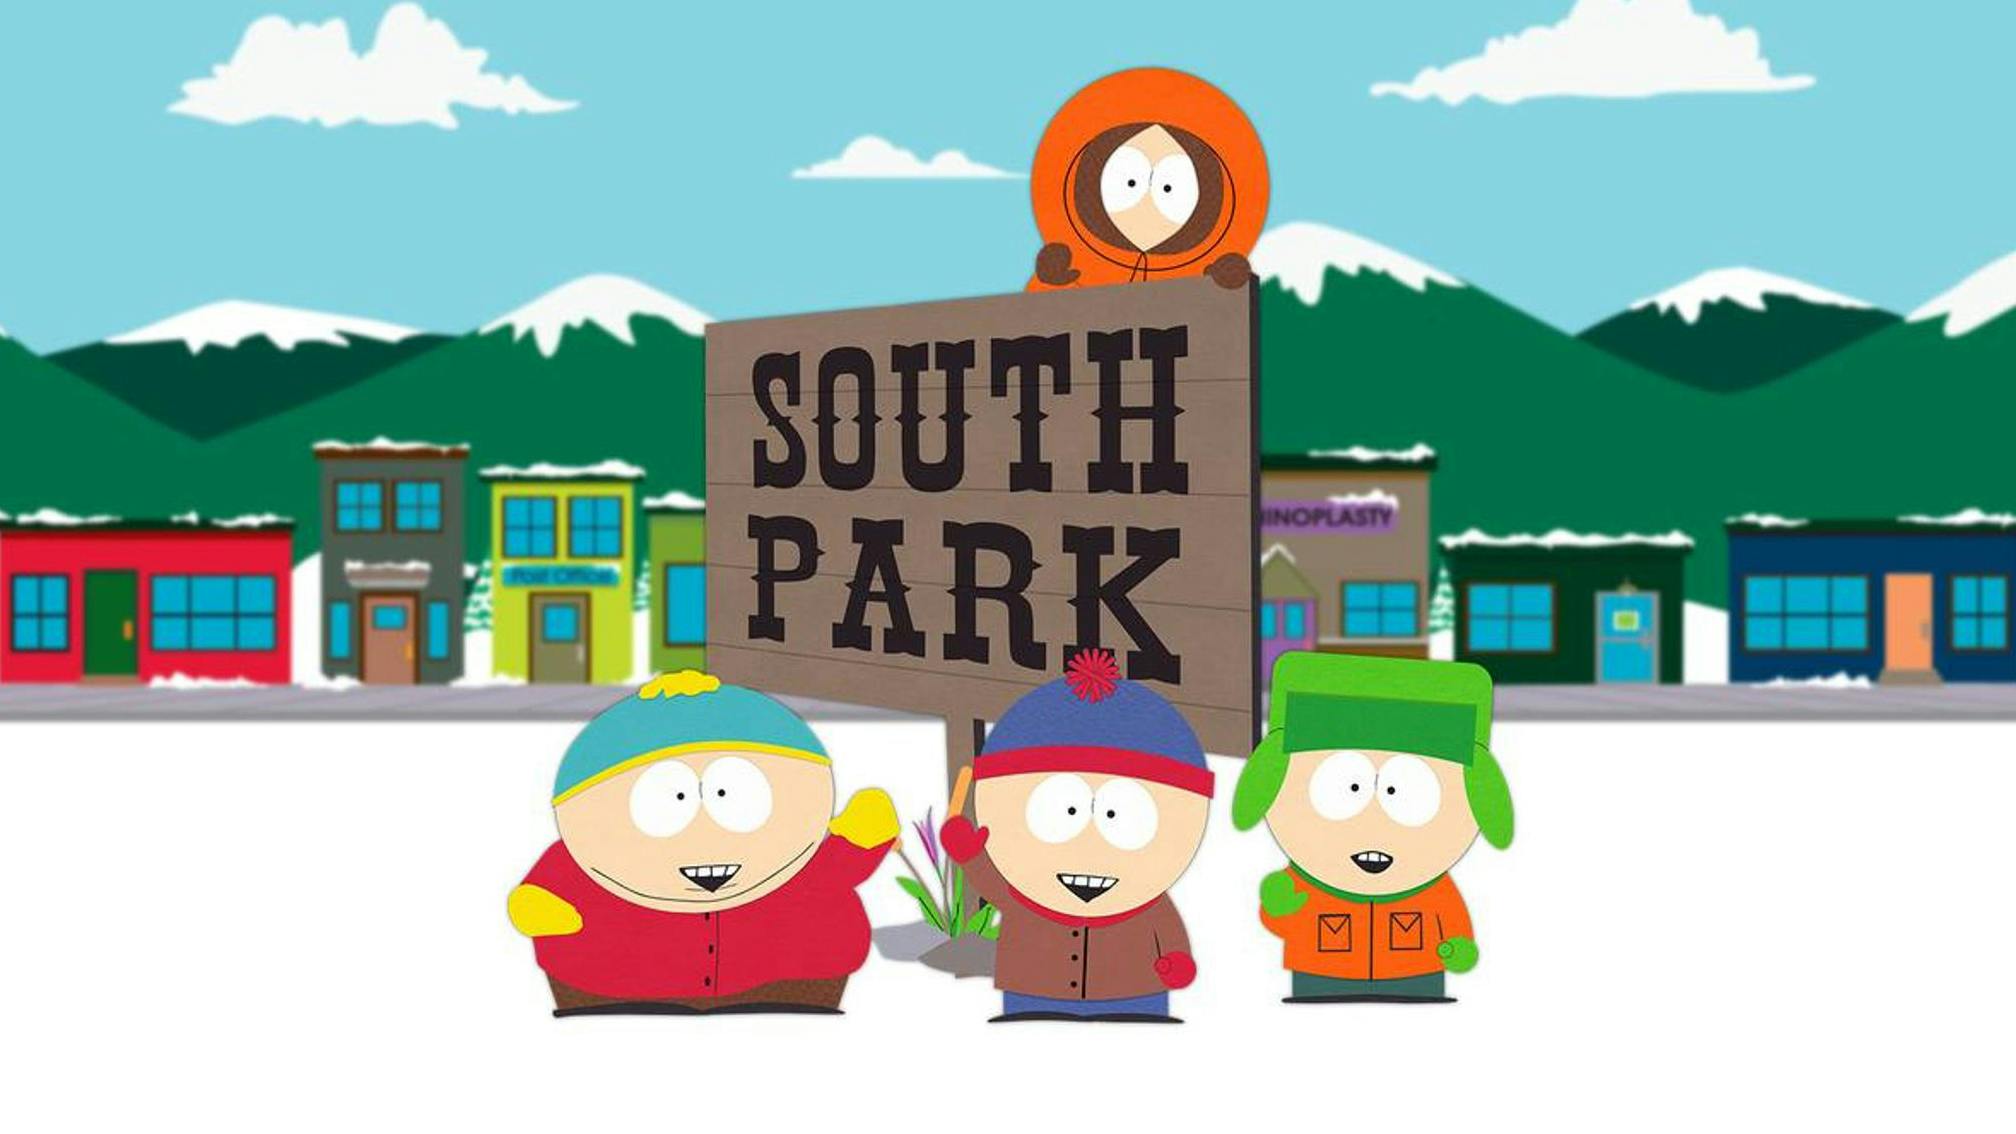 Two new South Park movies to be released in 2021